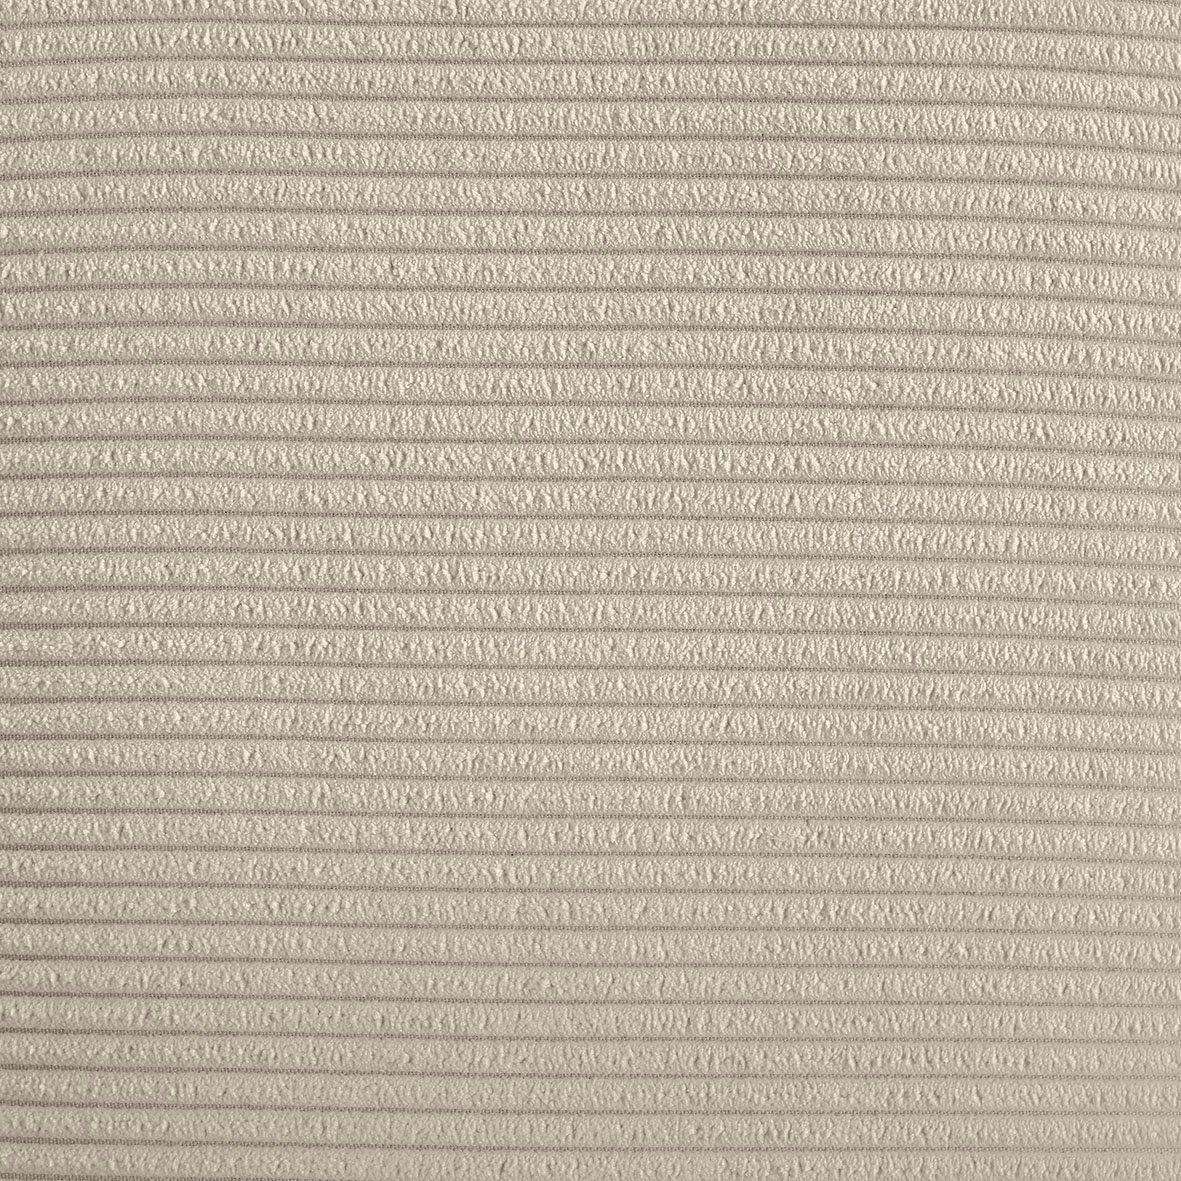 PIAGGE, Places PIAGGE zur Style Sessel Hochwertiger Serie passend Hellbeige of Cord-